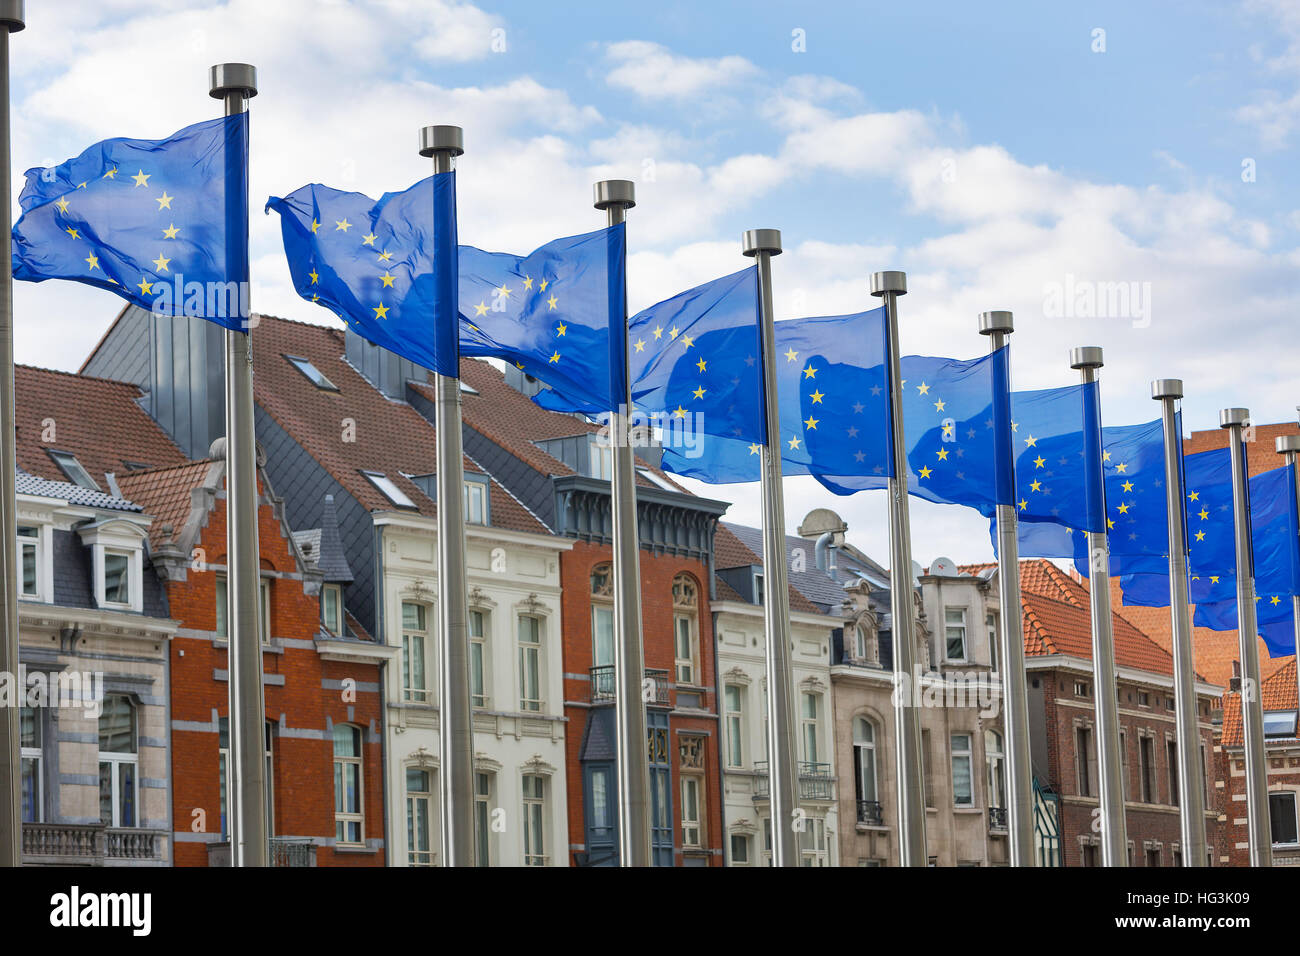 A line of EU flags flying on metal poles in front of the Berlaymont Building in Brussels with traditional houses in the background. Stock Photo